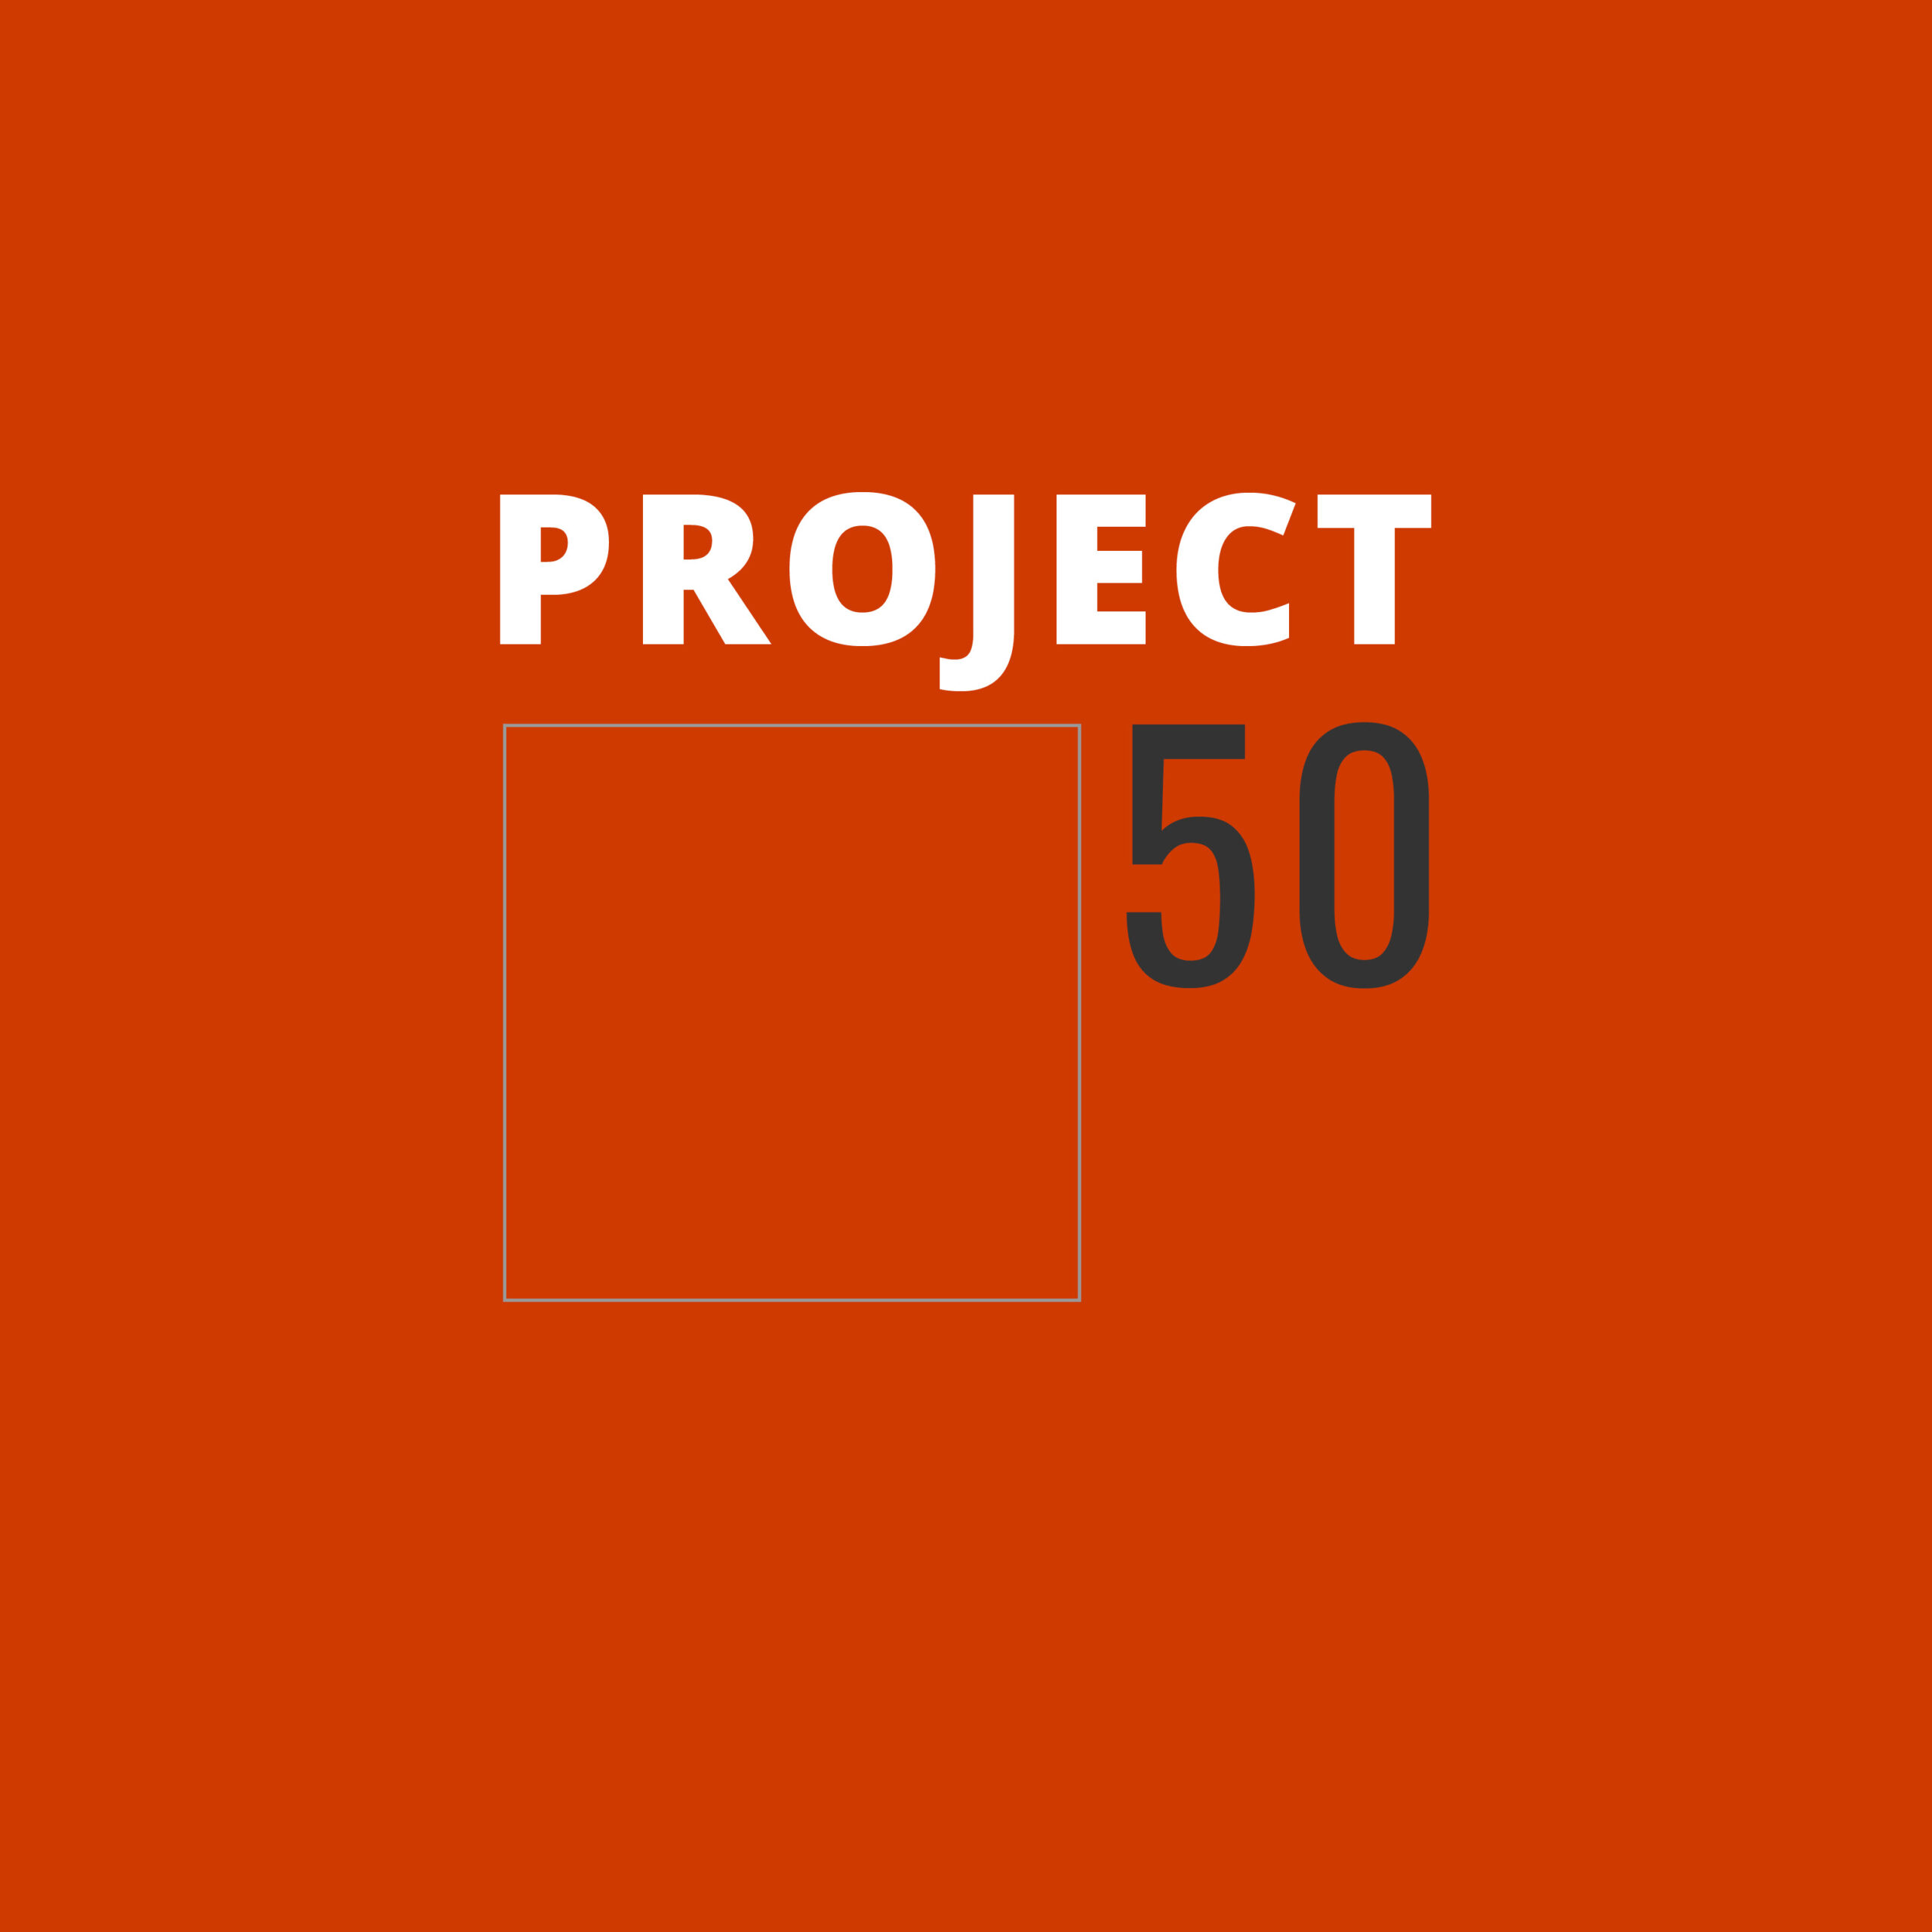 Project 50 - Square The end